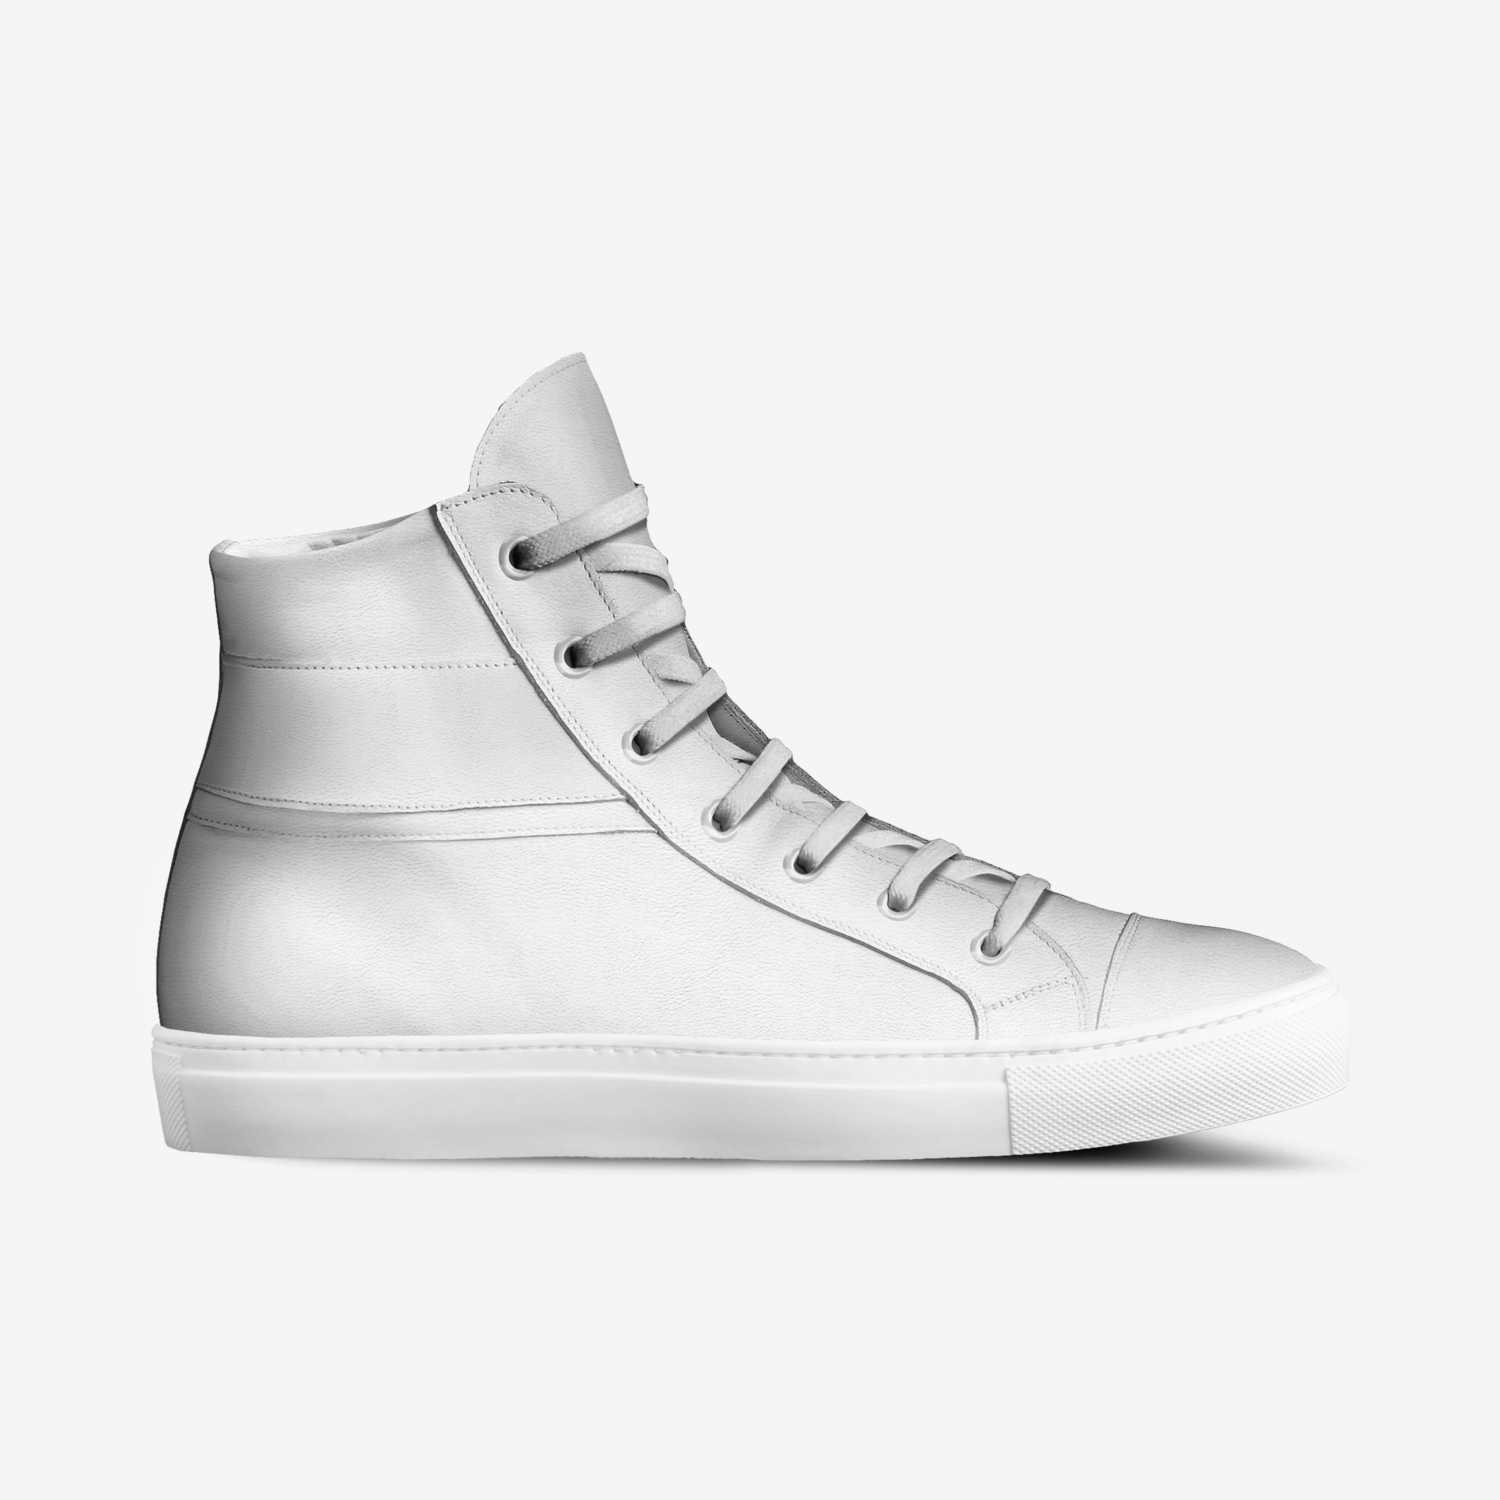 white custom made in Italy shoes by Vikrant Singh | Side view